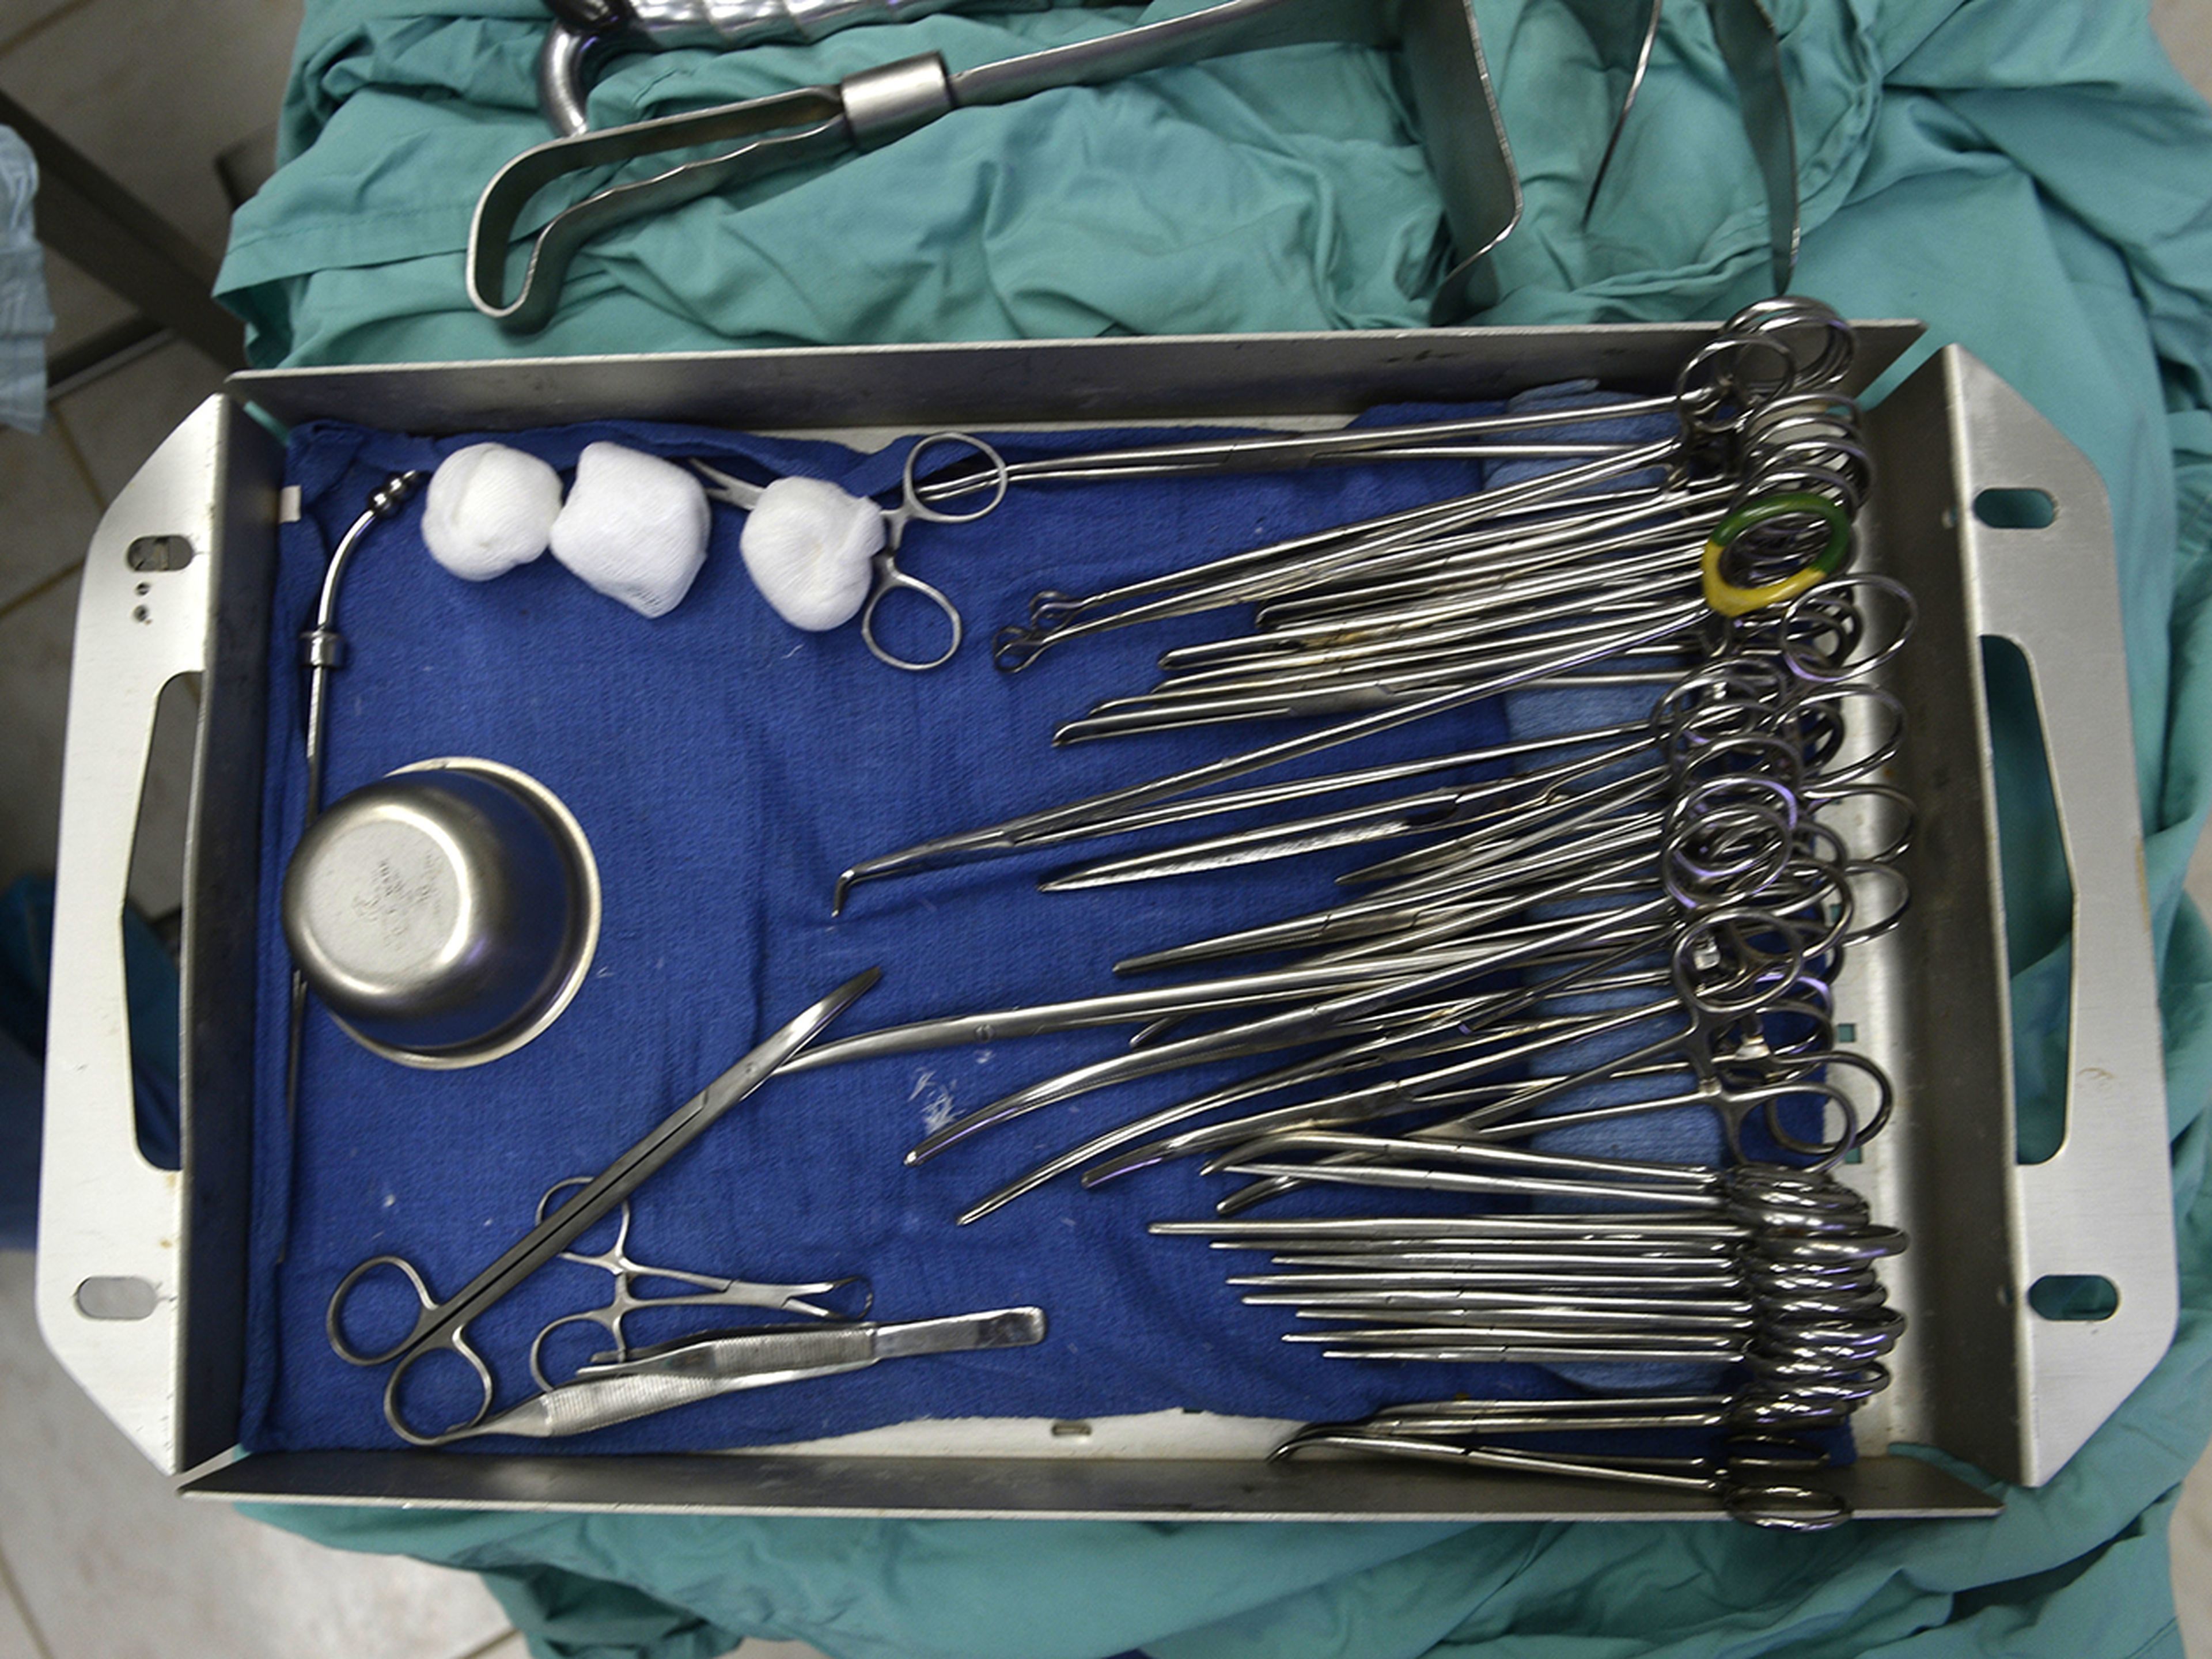 Medical instruments in an operating room